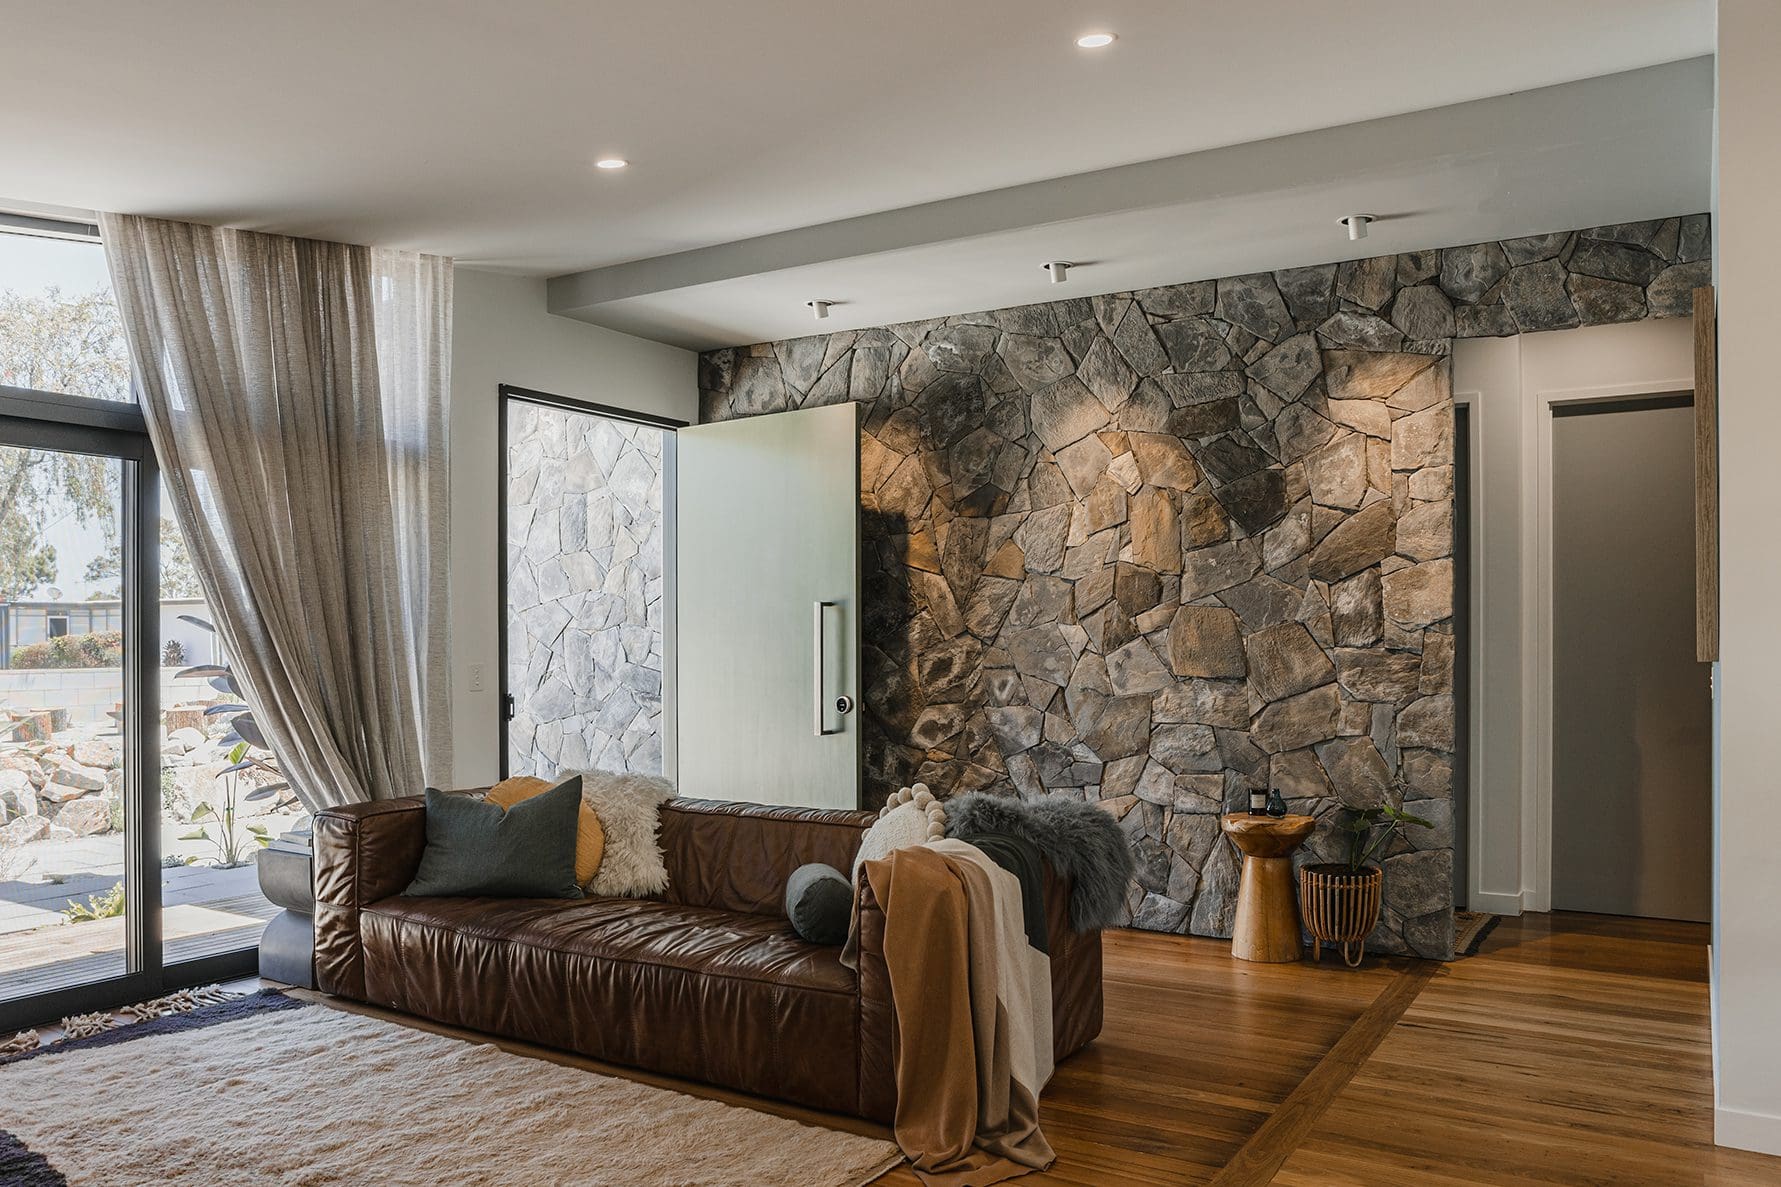 The Benefits of a stone feature in your home